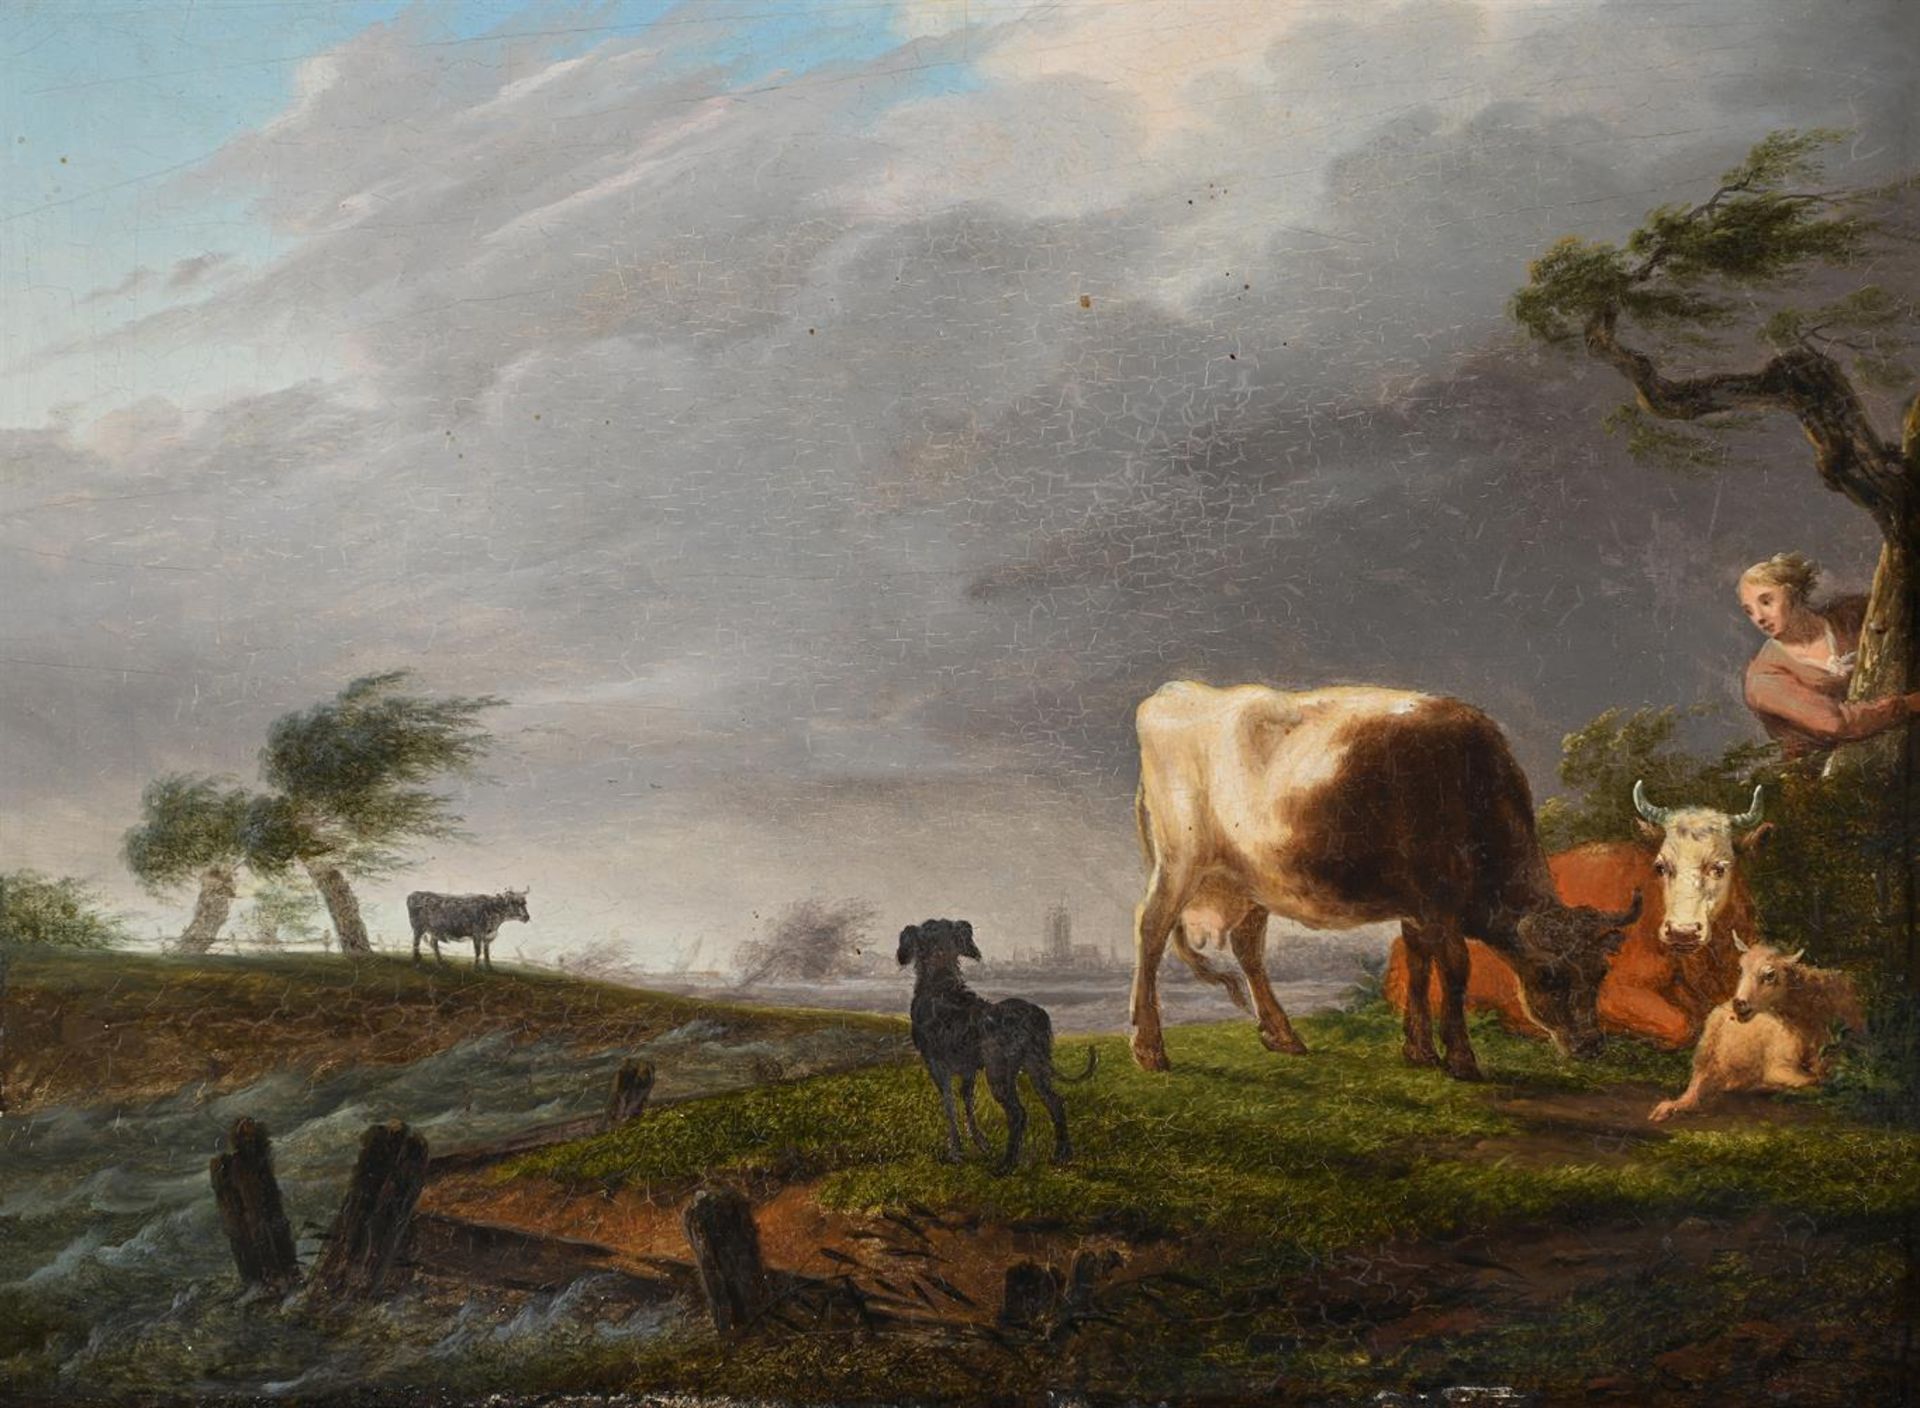 CIRCLE OF GILLIS SMAK GREGOOR (DUTCH 1770-1843), A GIRL AND CATTLE IN A STORM - Image 2 of 3